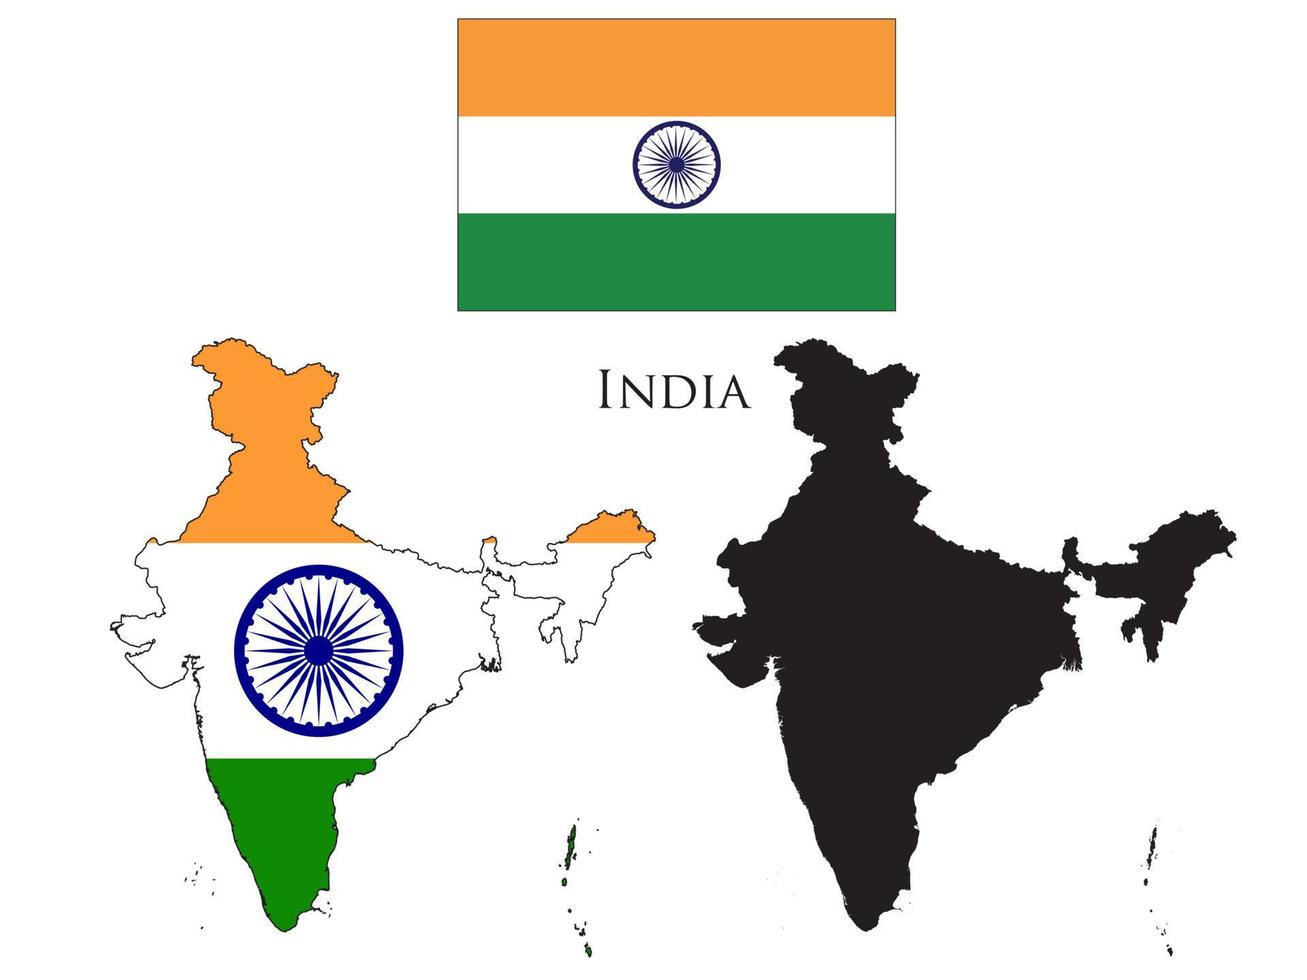 india flag and map illustration vector